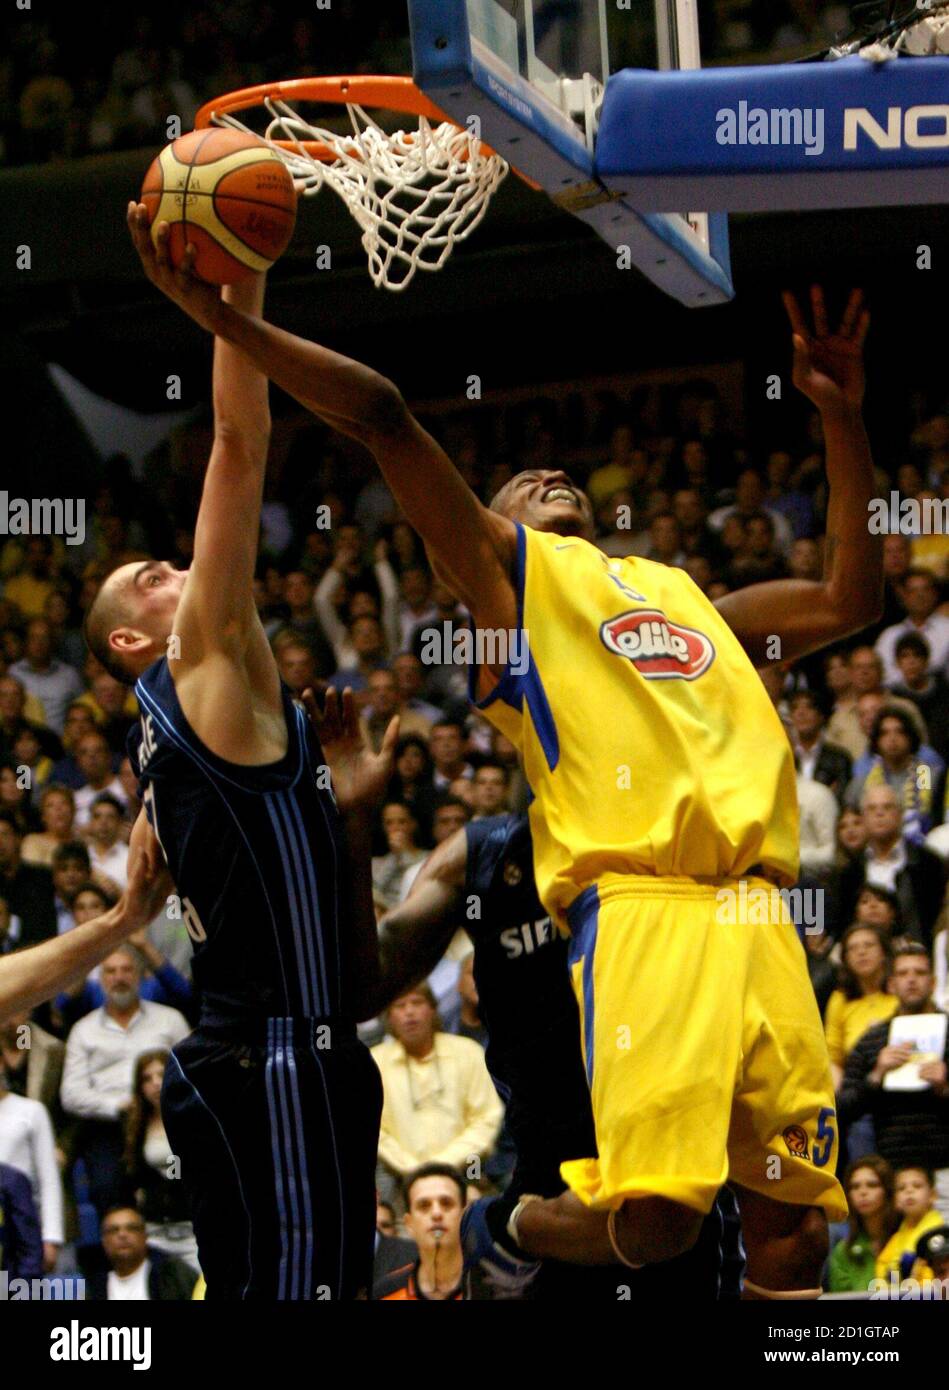 Baston Maceo (R) of Maccabi Tel Aviv goes to the basket during their  Euroleague basketball match against Real Madrid in Tel Aviv March 16, 2006.  REUTERS/Gil Cohen Magen Stock Photo - Alamy